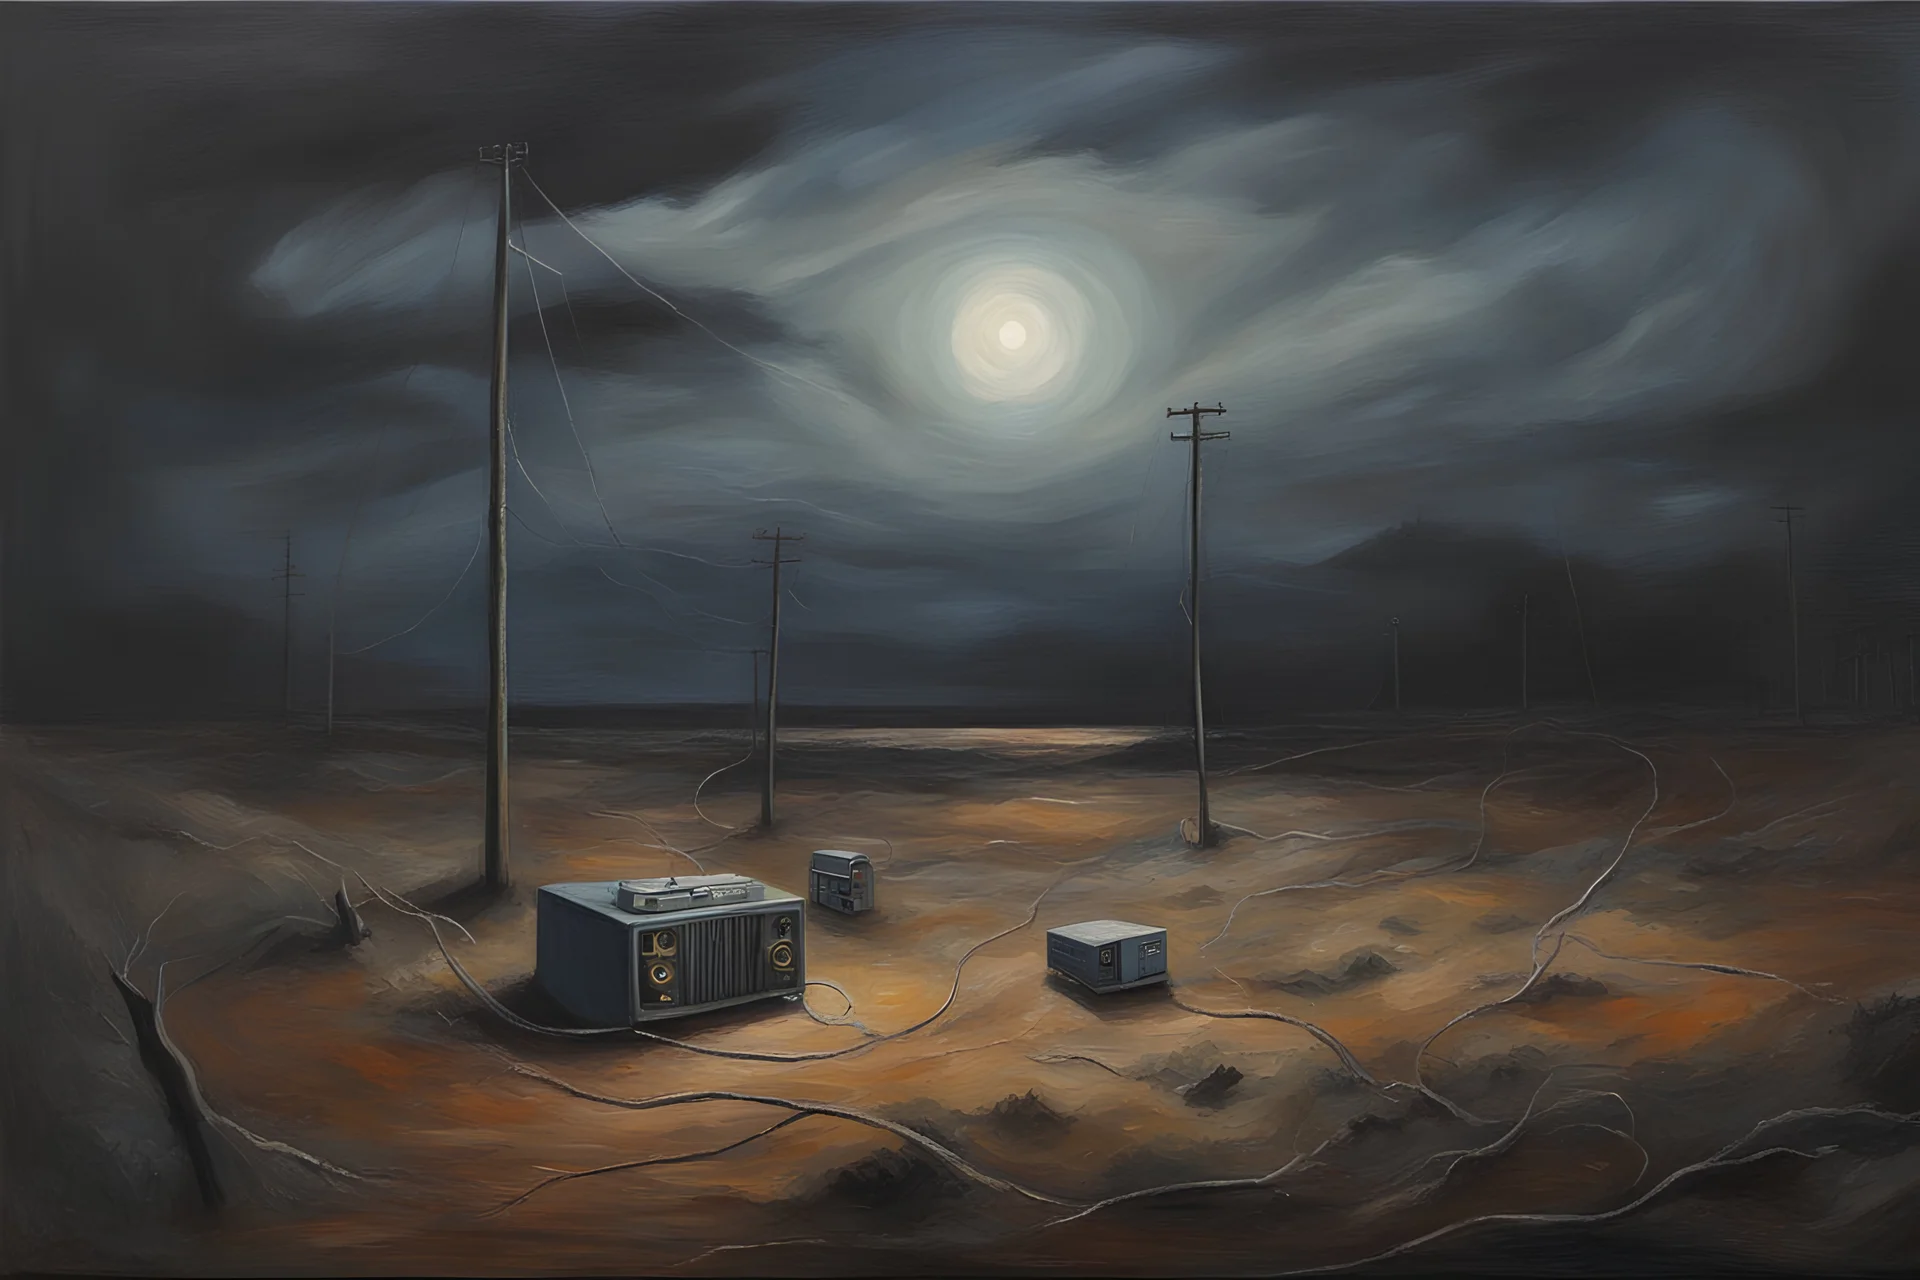 oil painting, When the night shows The signals grow on radios All the strange things They come and go, as early warnings